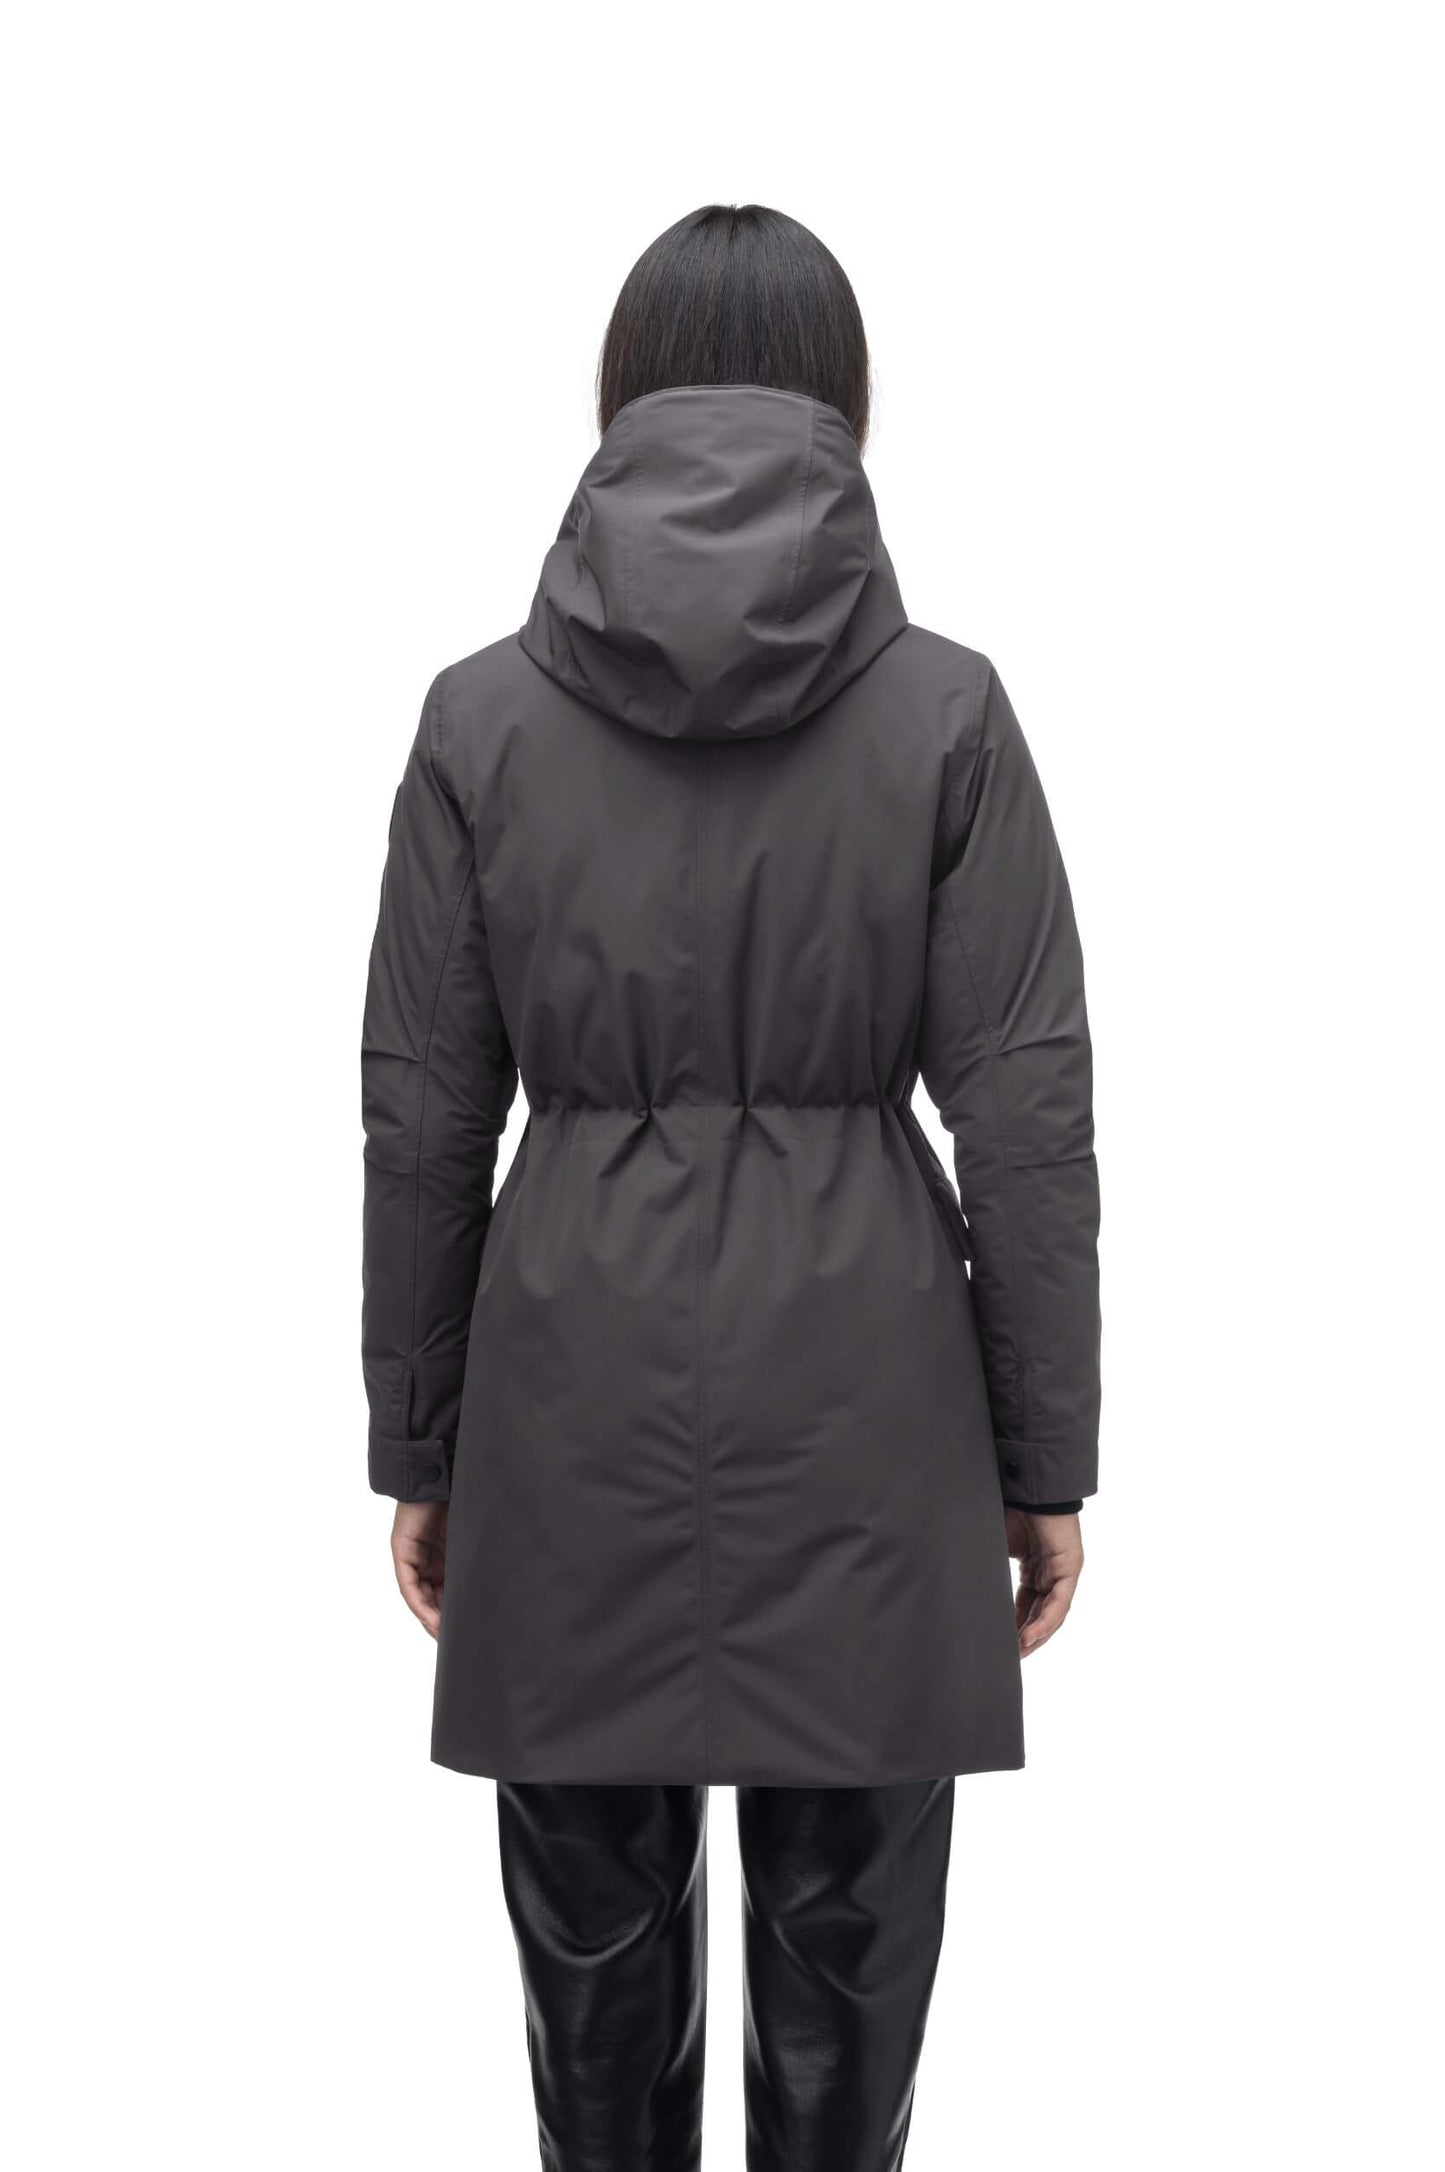 Romeda Furless Ladies Mid Thigh Parka in thigh length, Canadian duck down insulation, non-removable hood, and two-way front zipper, in Steel Grey